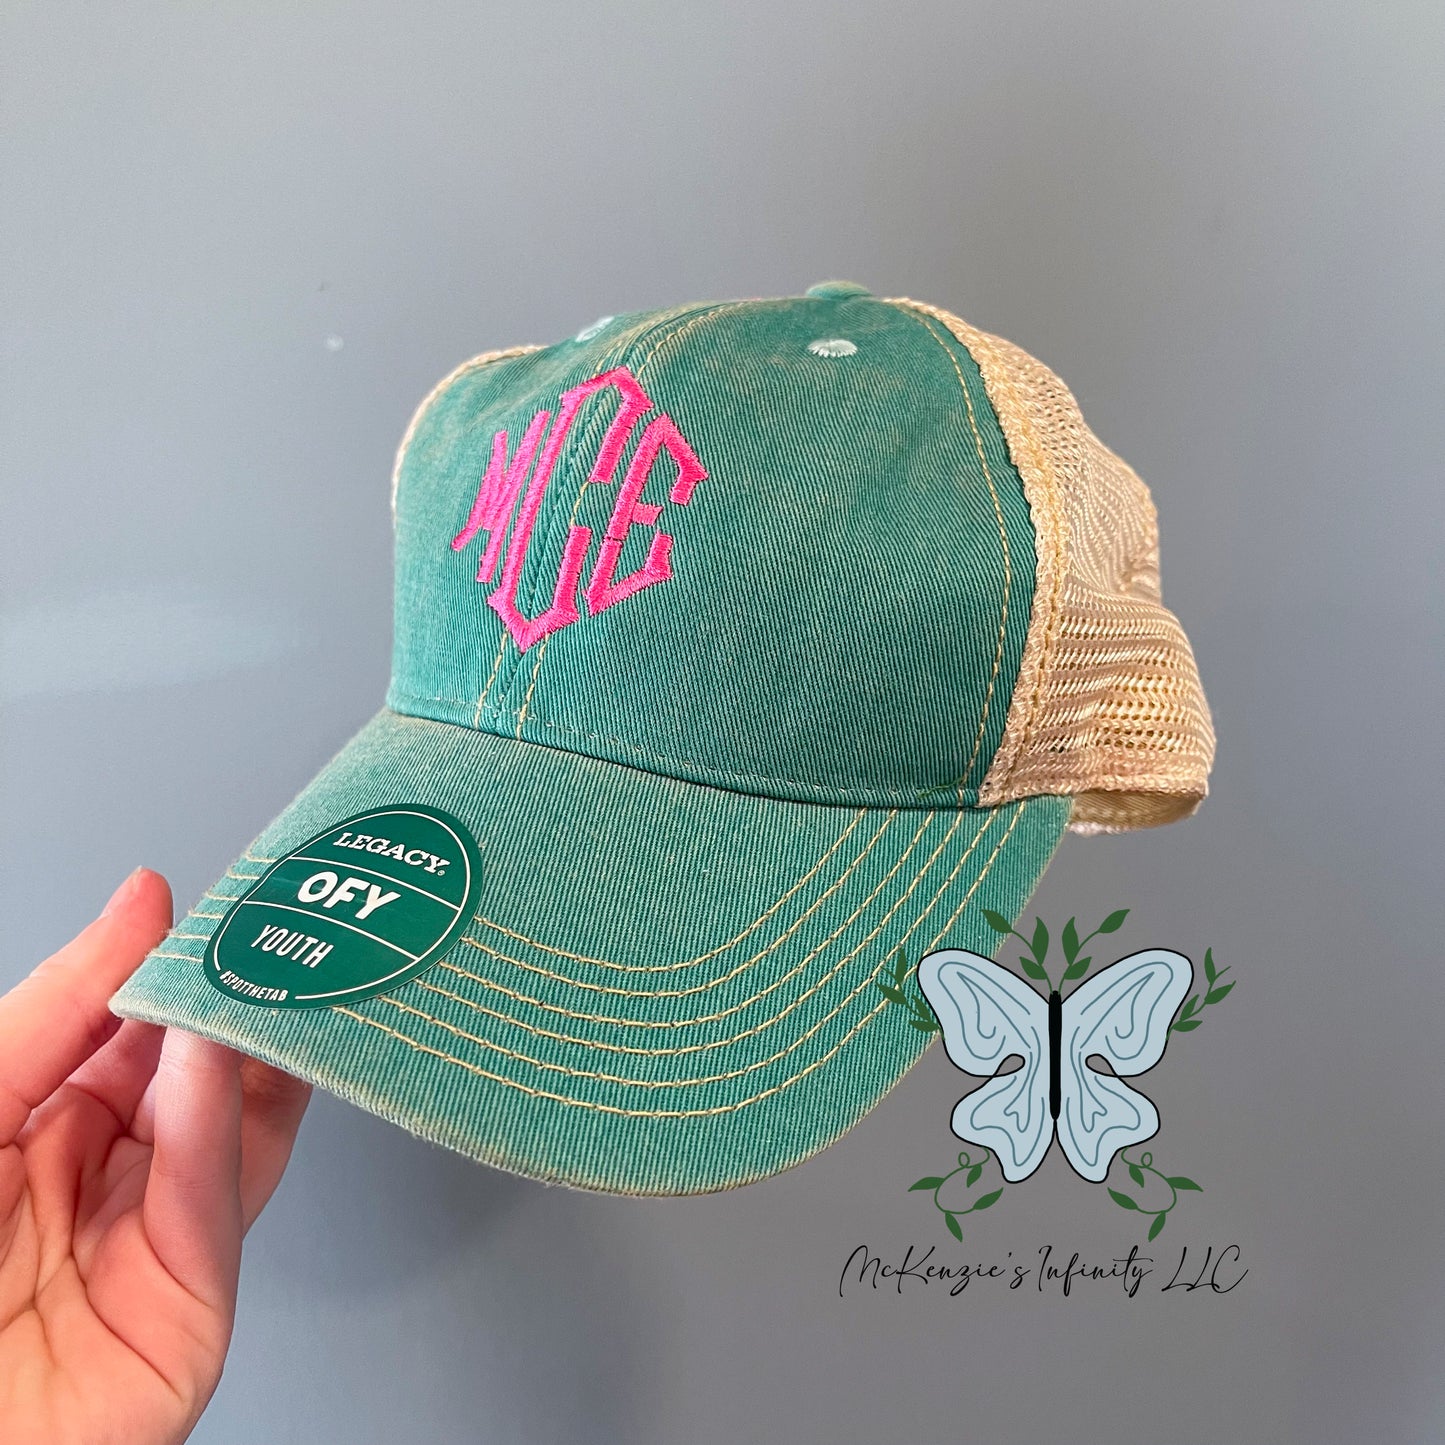 YOUTH Personalized Monogrammed Embroidered Legacy Old Favorite Trucker Cap/Hat